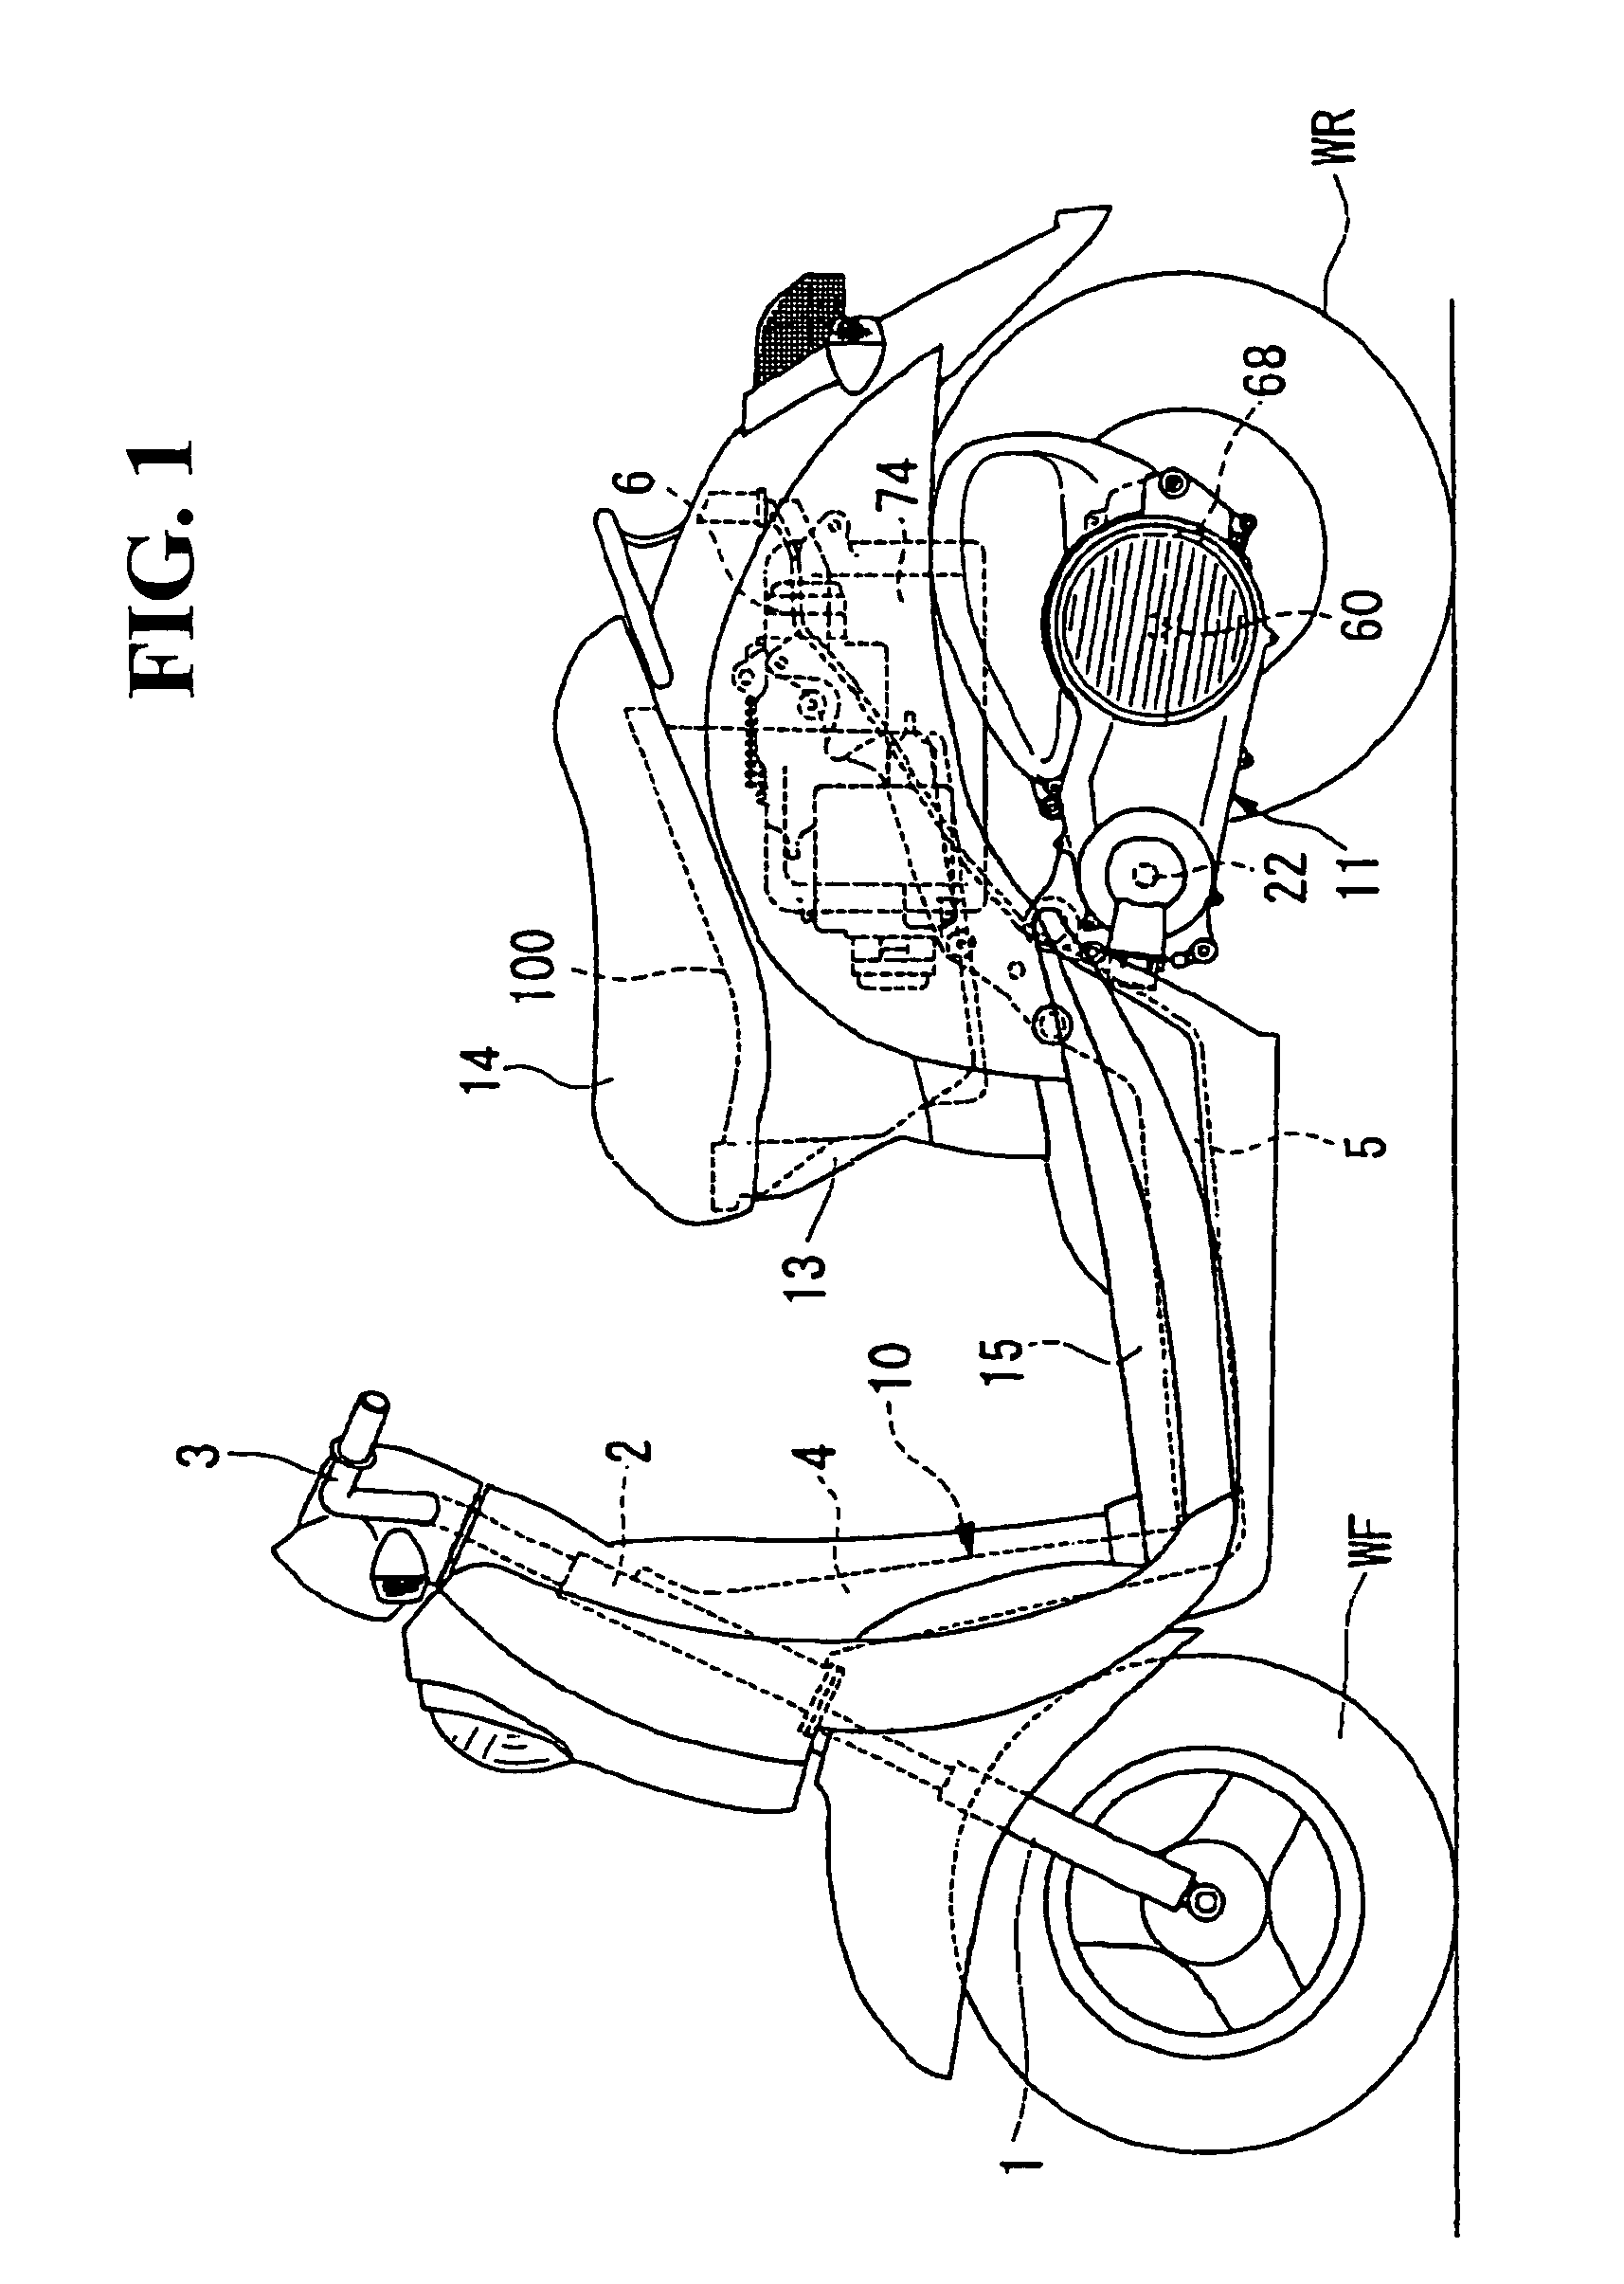 Power switchover apparatus for a hybrid vehicle